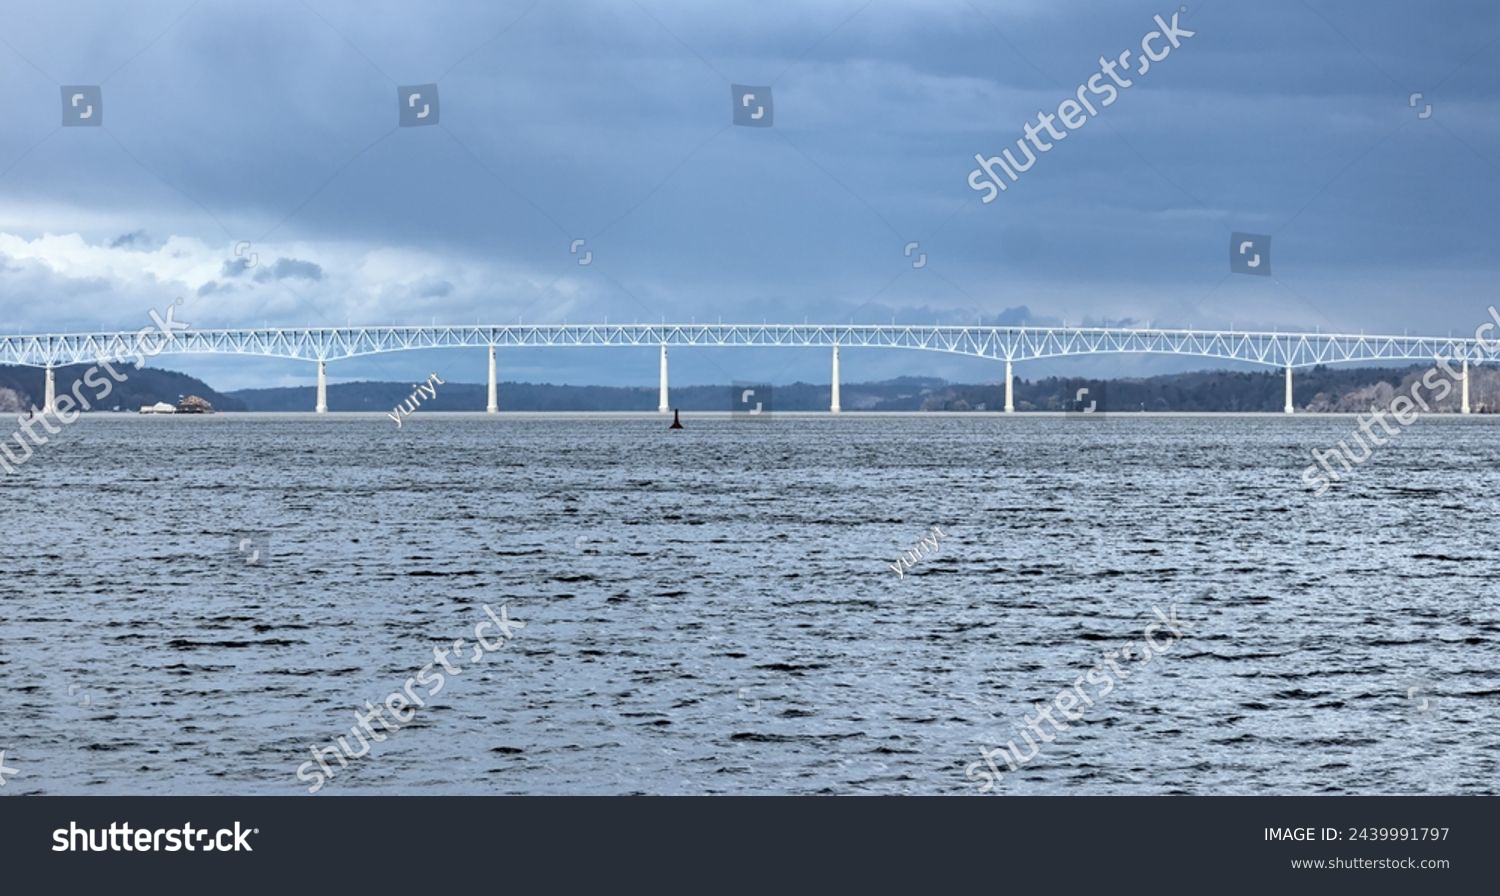 view of the Kingston-Rhinecliff Bridge from Kingston point beach (continuous under deck truss toll bridge across hudson river in new york state) #2439991797